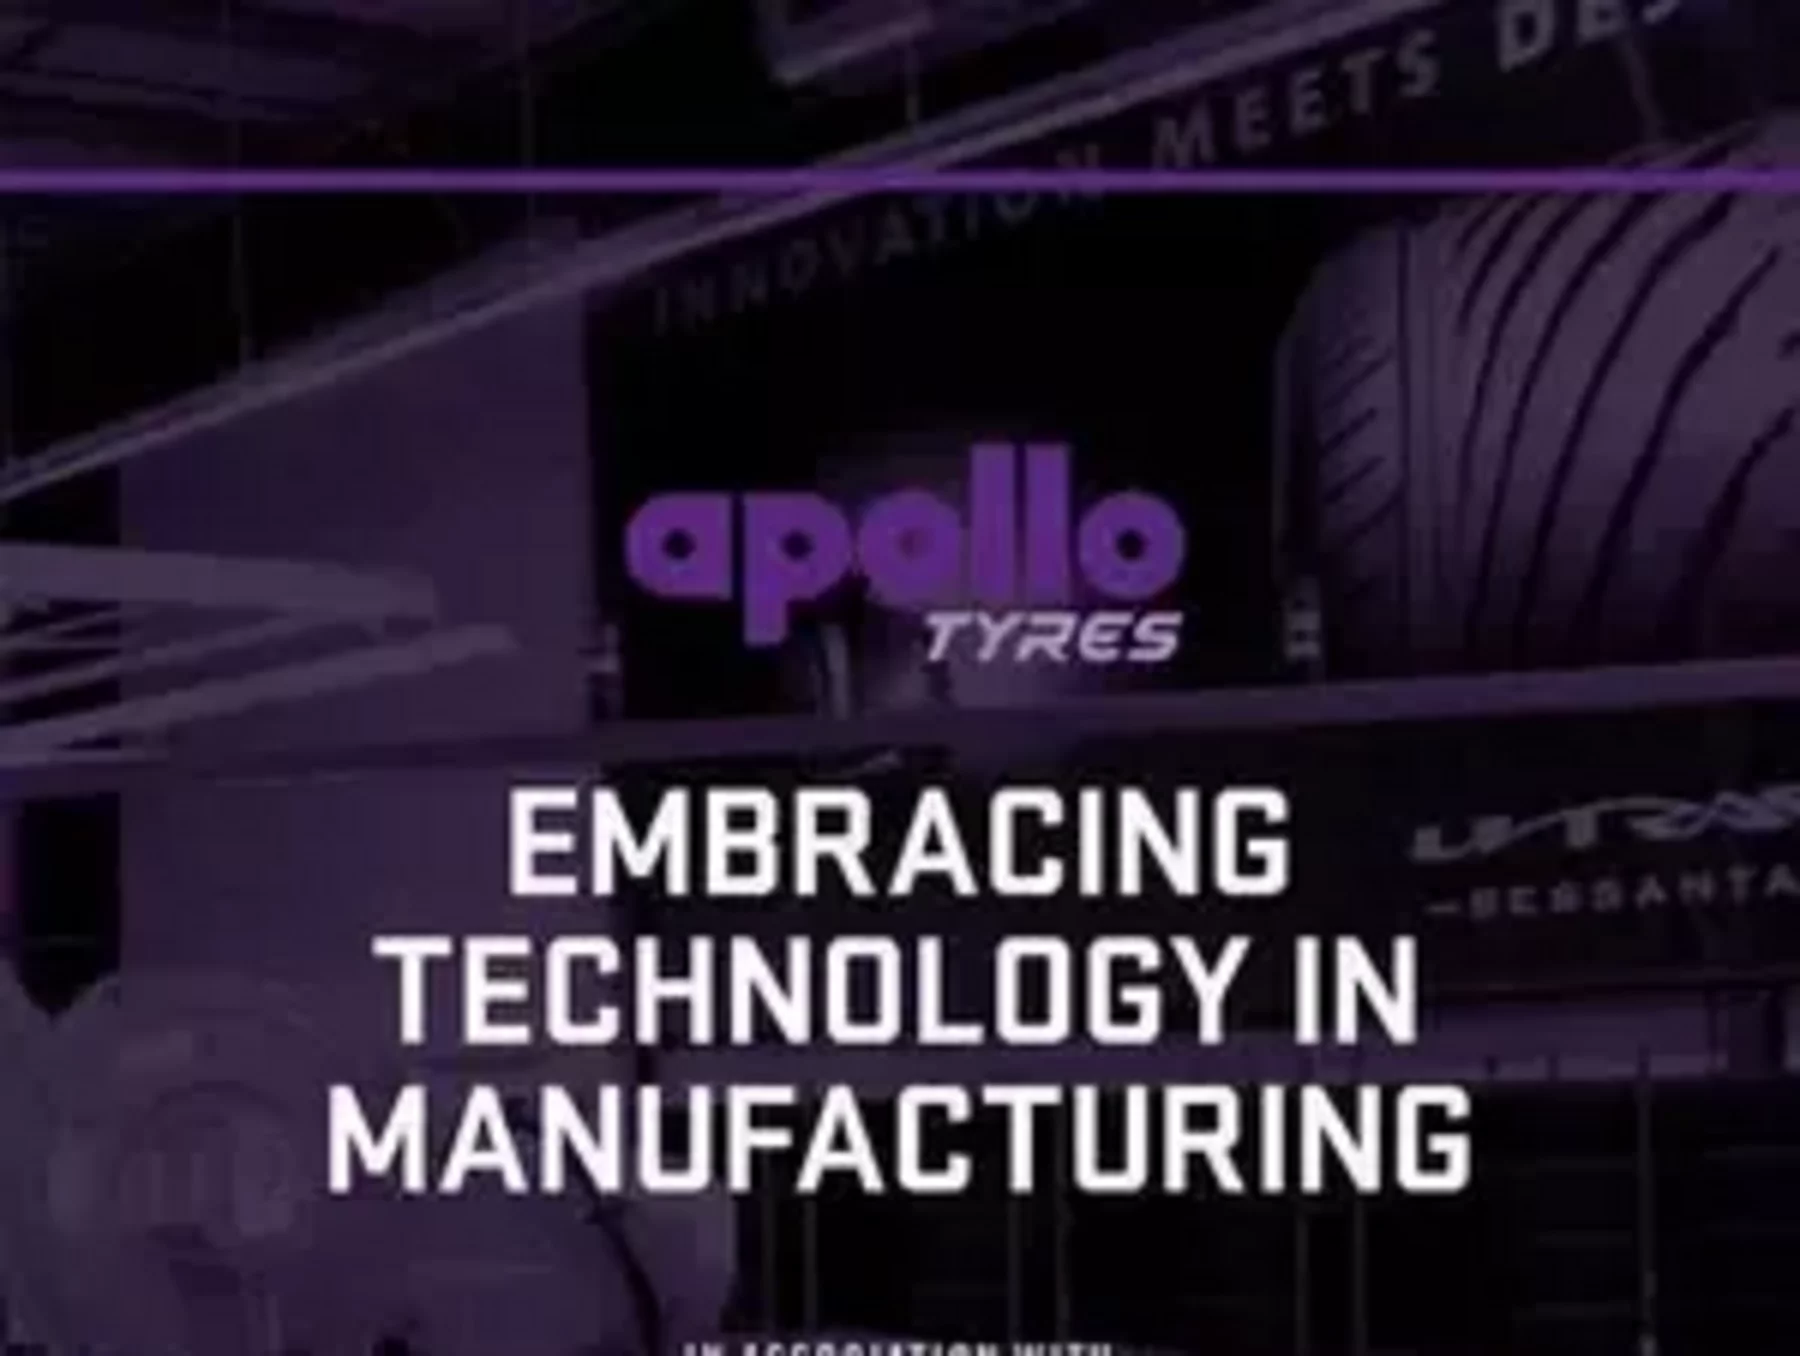 Dheeraj k s on LinkedIn: Joined Apollo Tyres as Graduate Engineer Trainee  in the production…